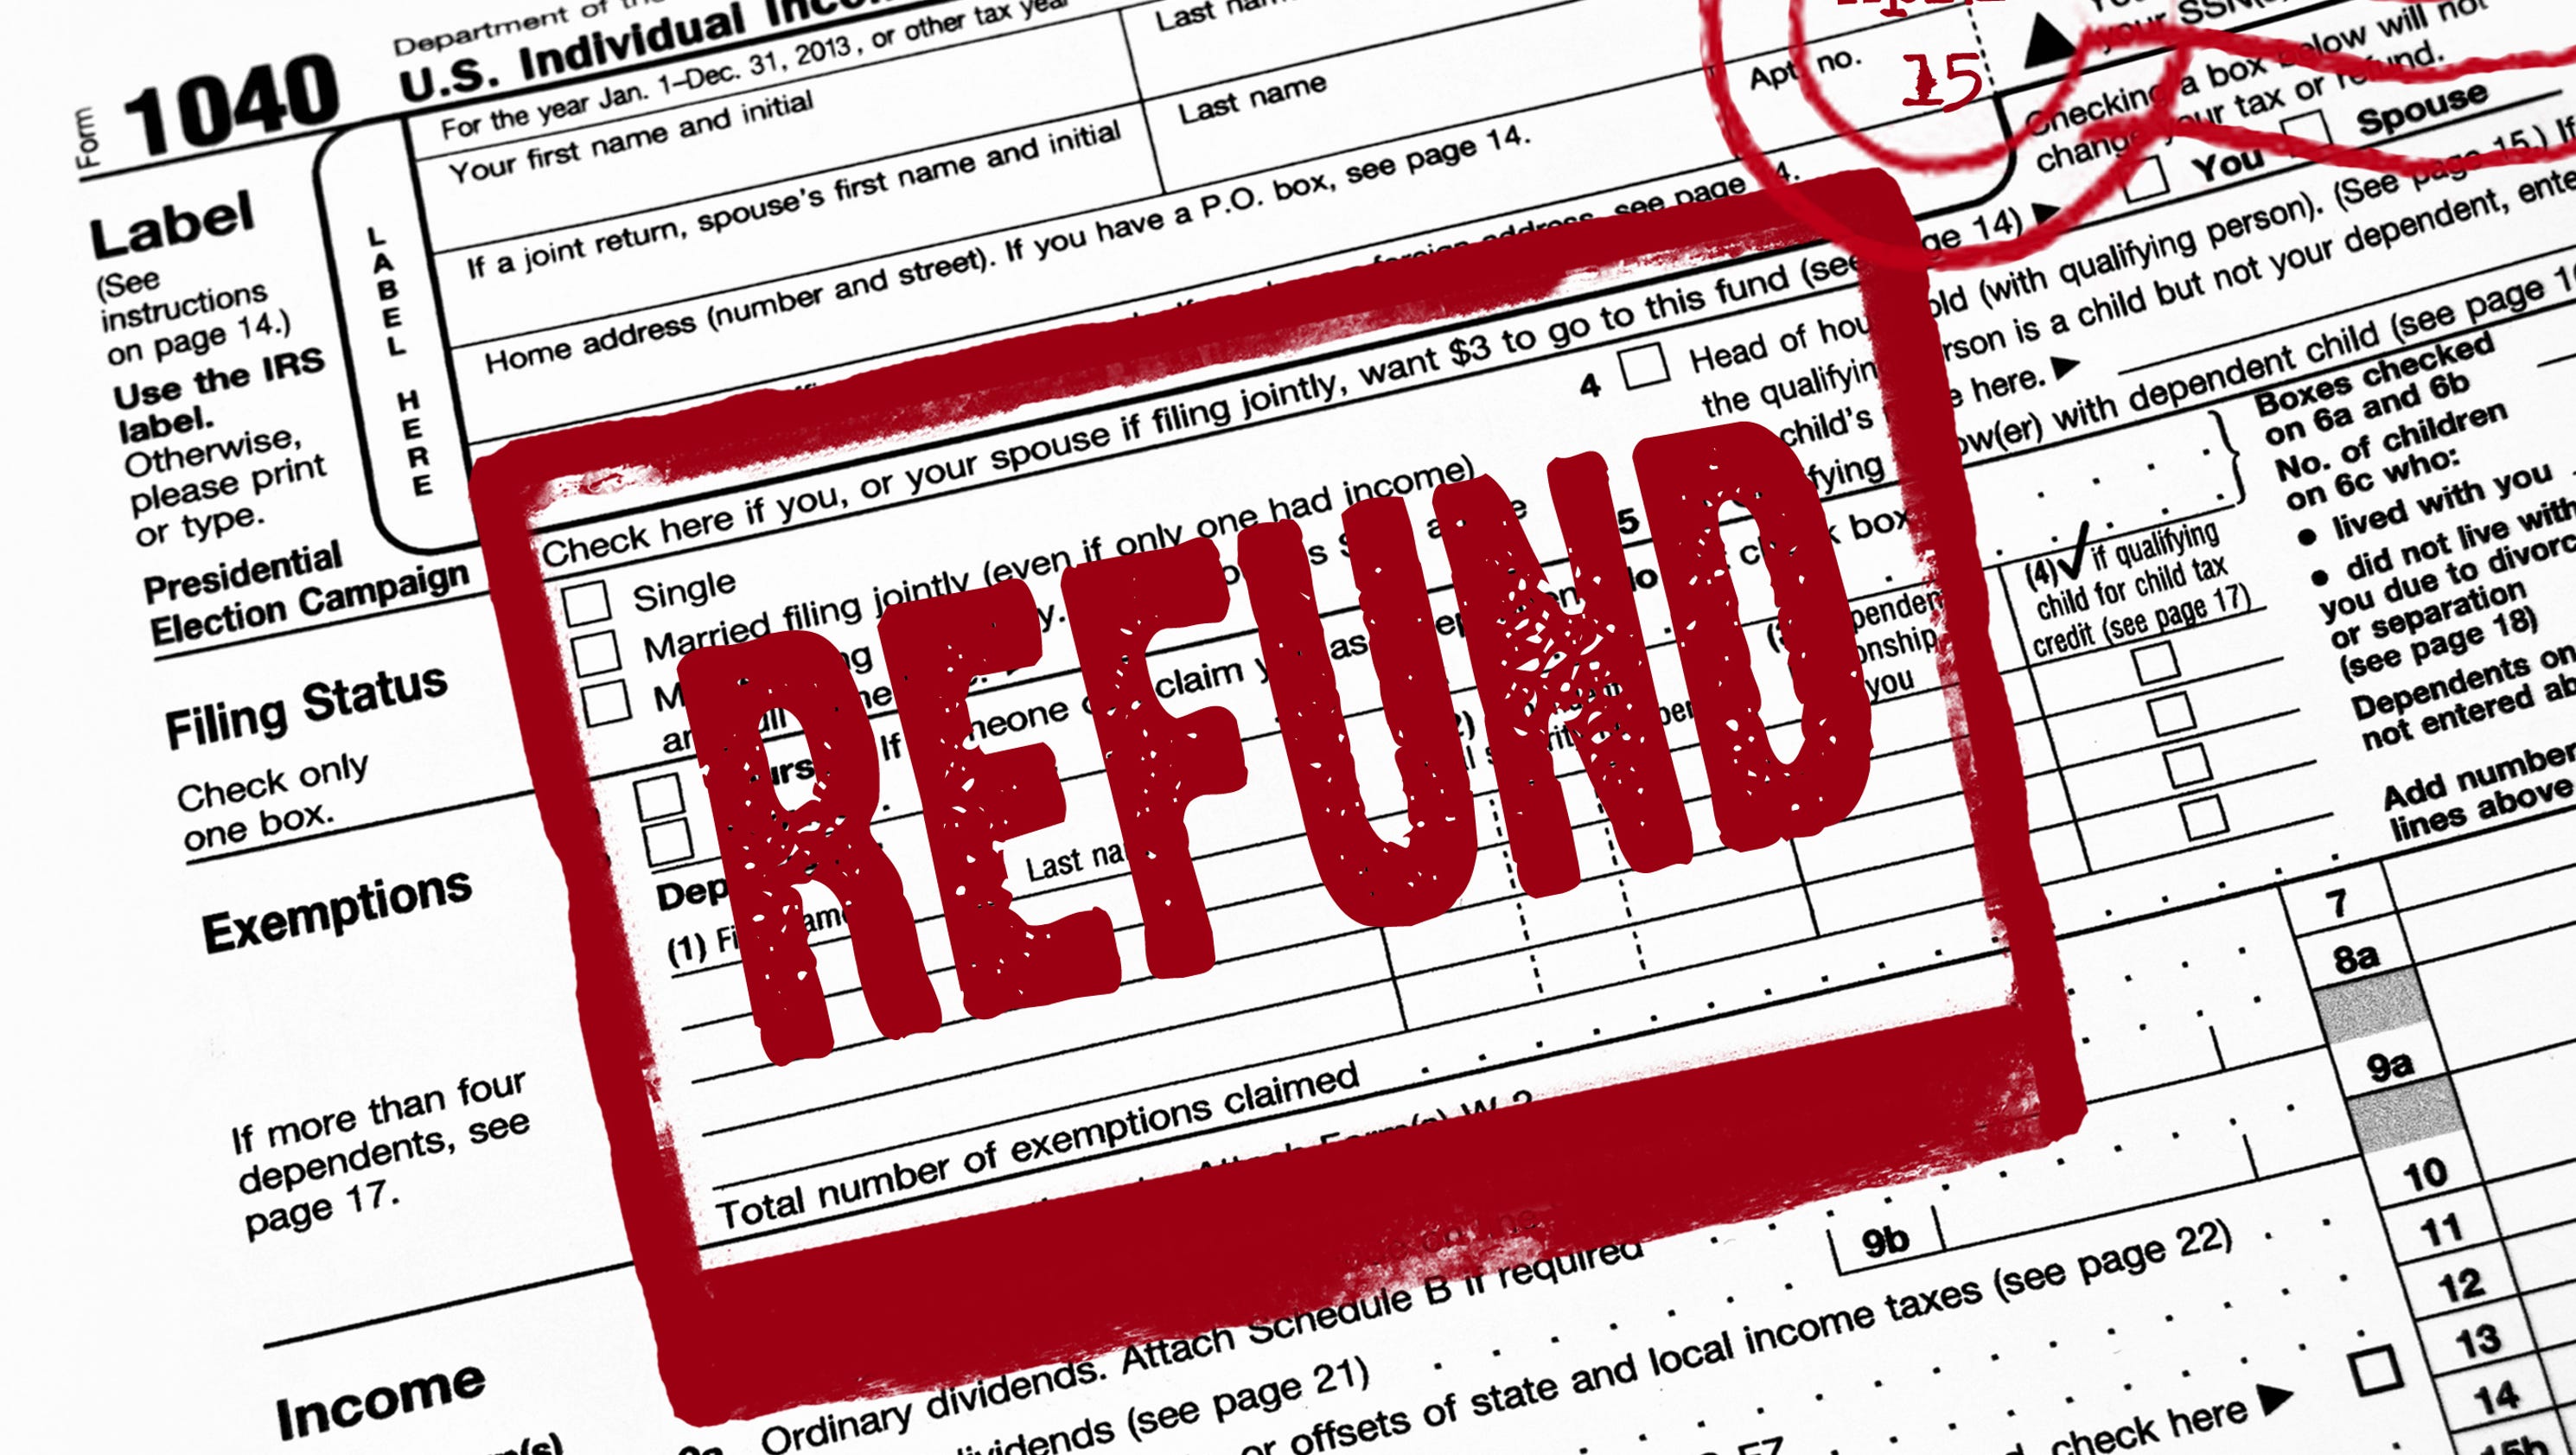 tindradesigns-how-to-check-my-kentucky-state-tax-refund